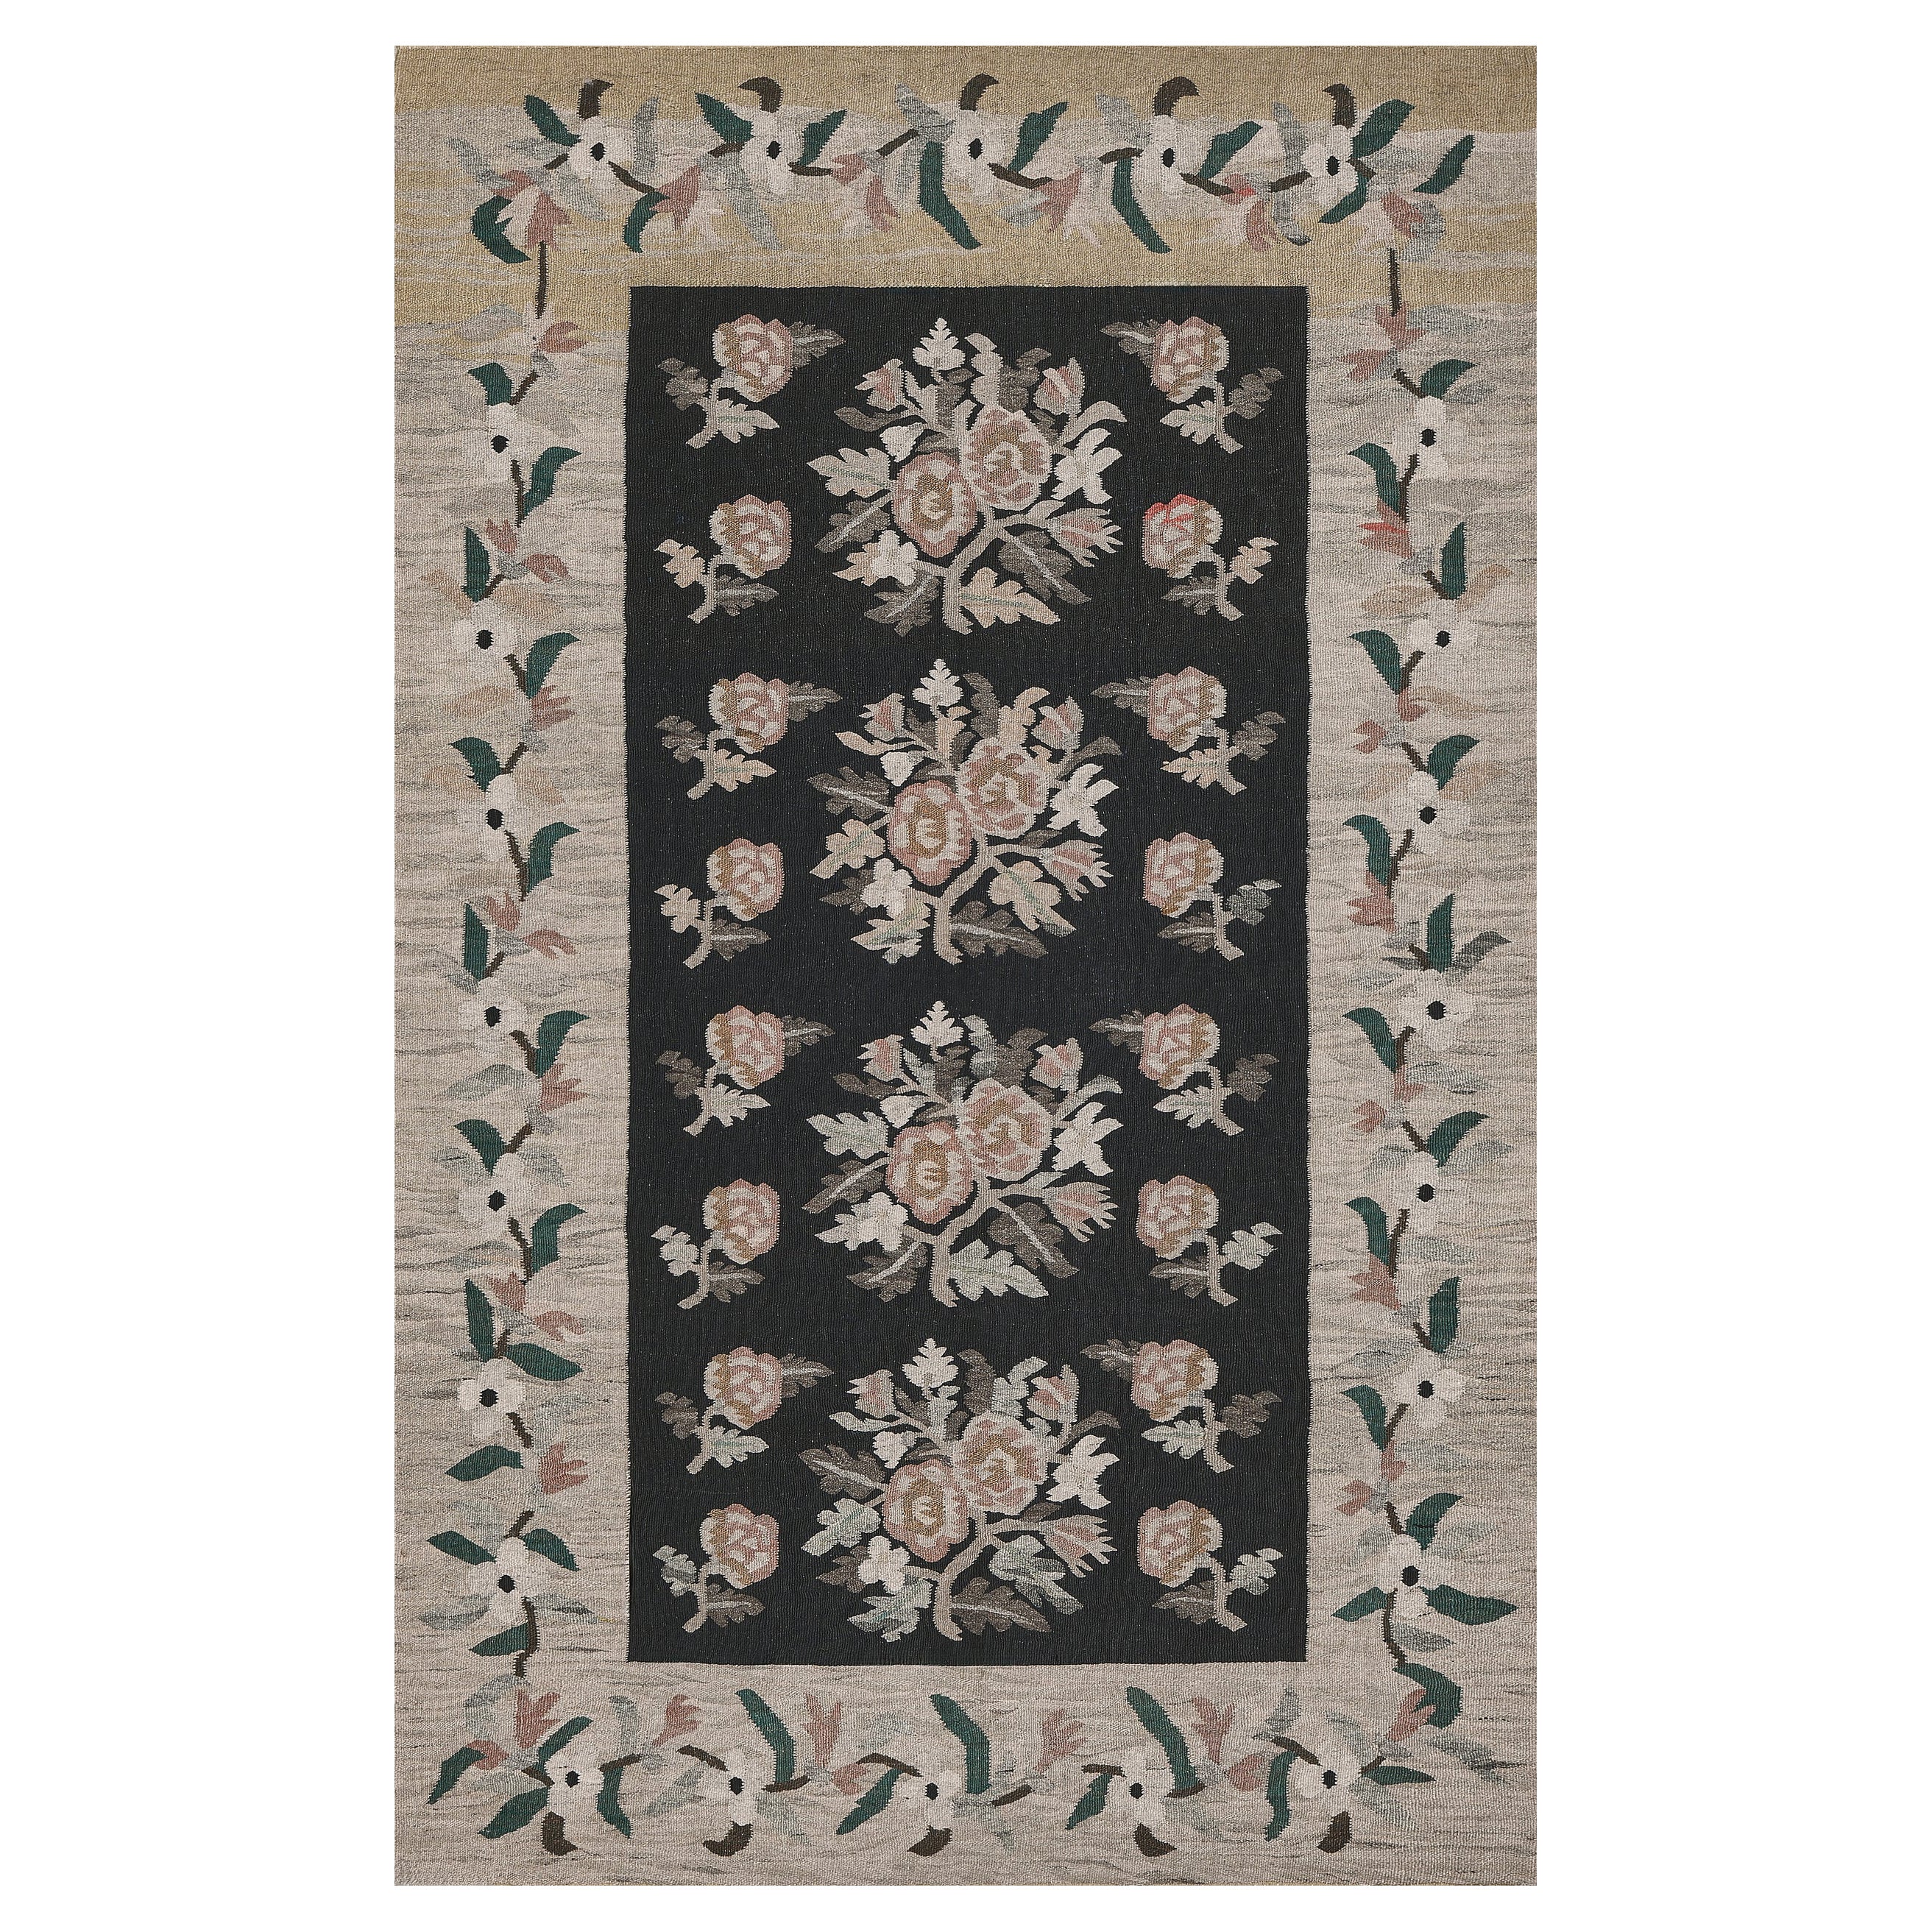 Antique Hand-woven Wool Floral Bessarabian Rug from Romania For Sale